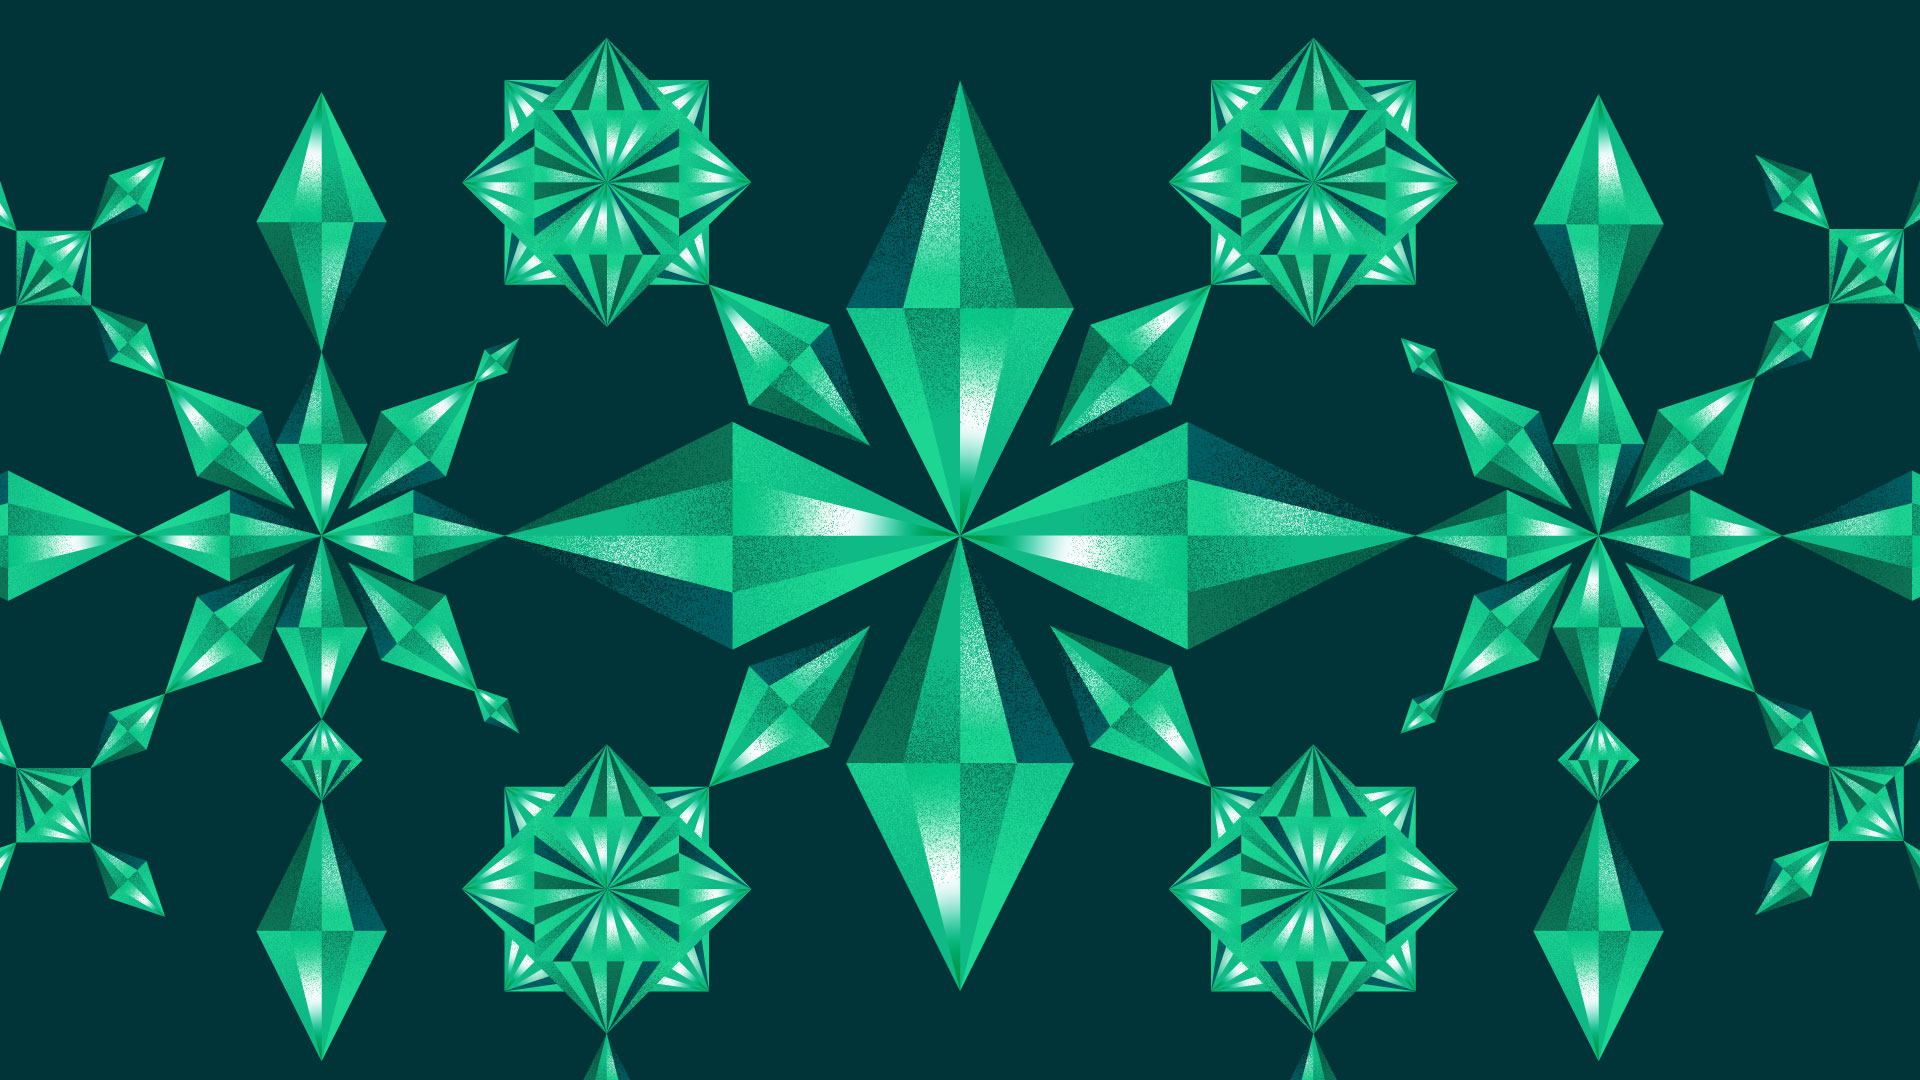 bluethumb illustration with green diamonds growing from the center